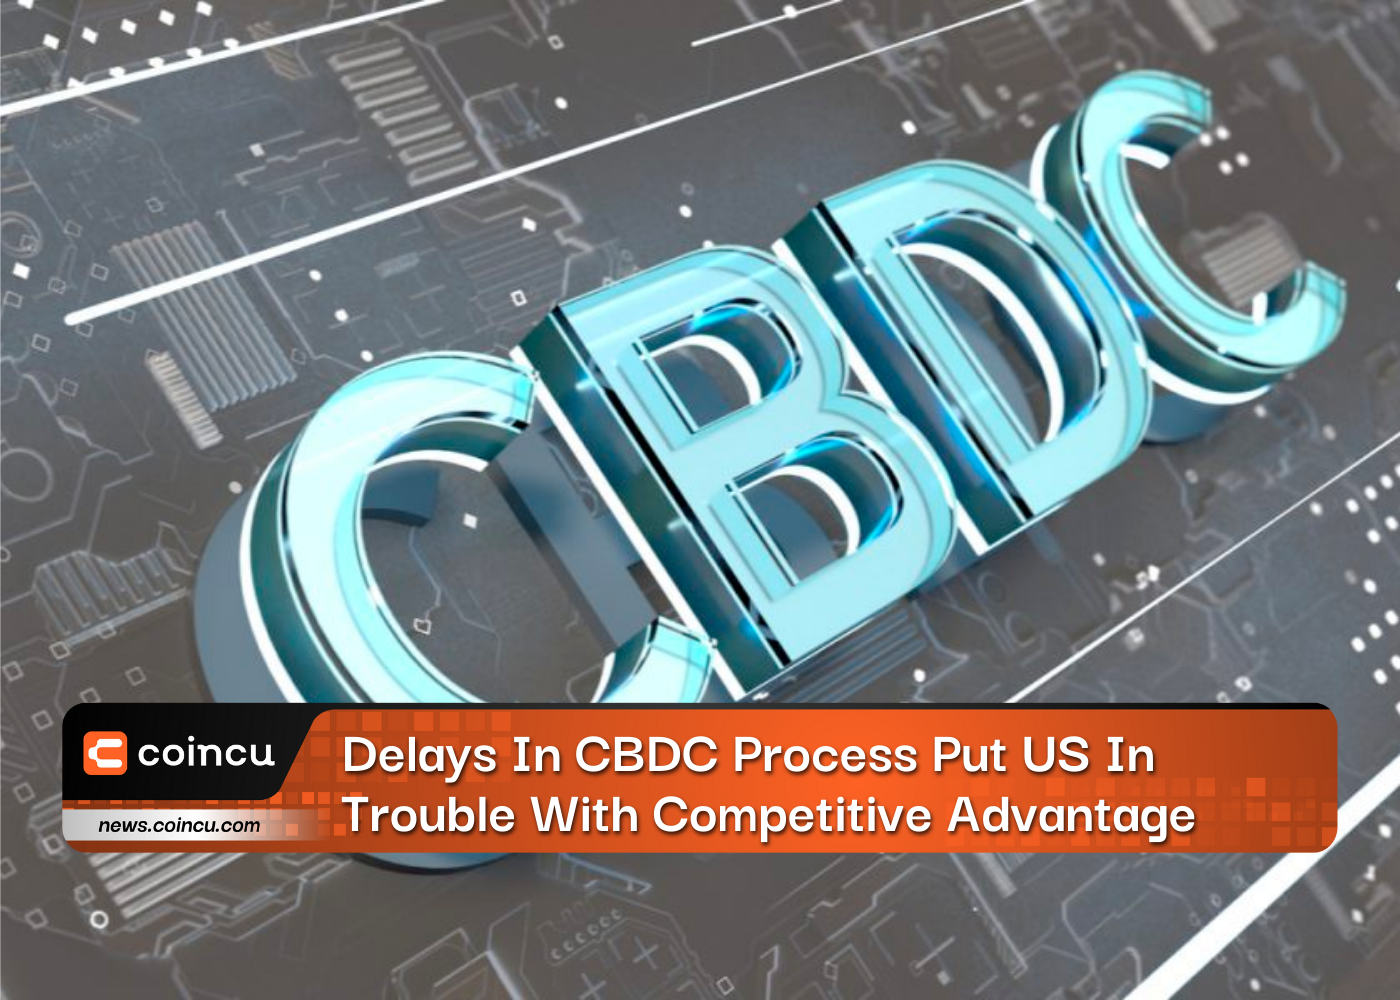 Delays In CBDC Process Put US In Trouble With Competitive Advantage - Former CIA Analyst